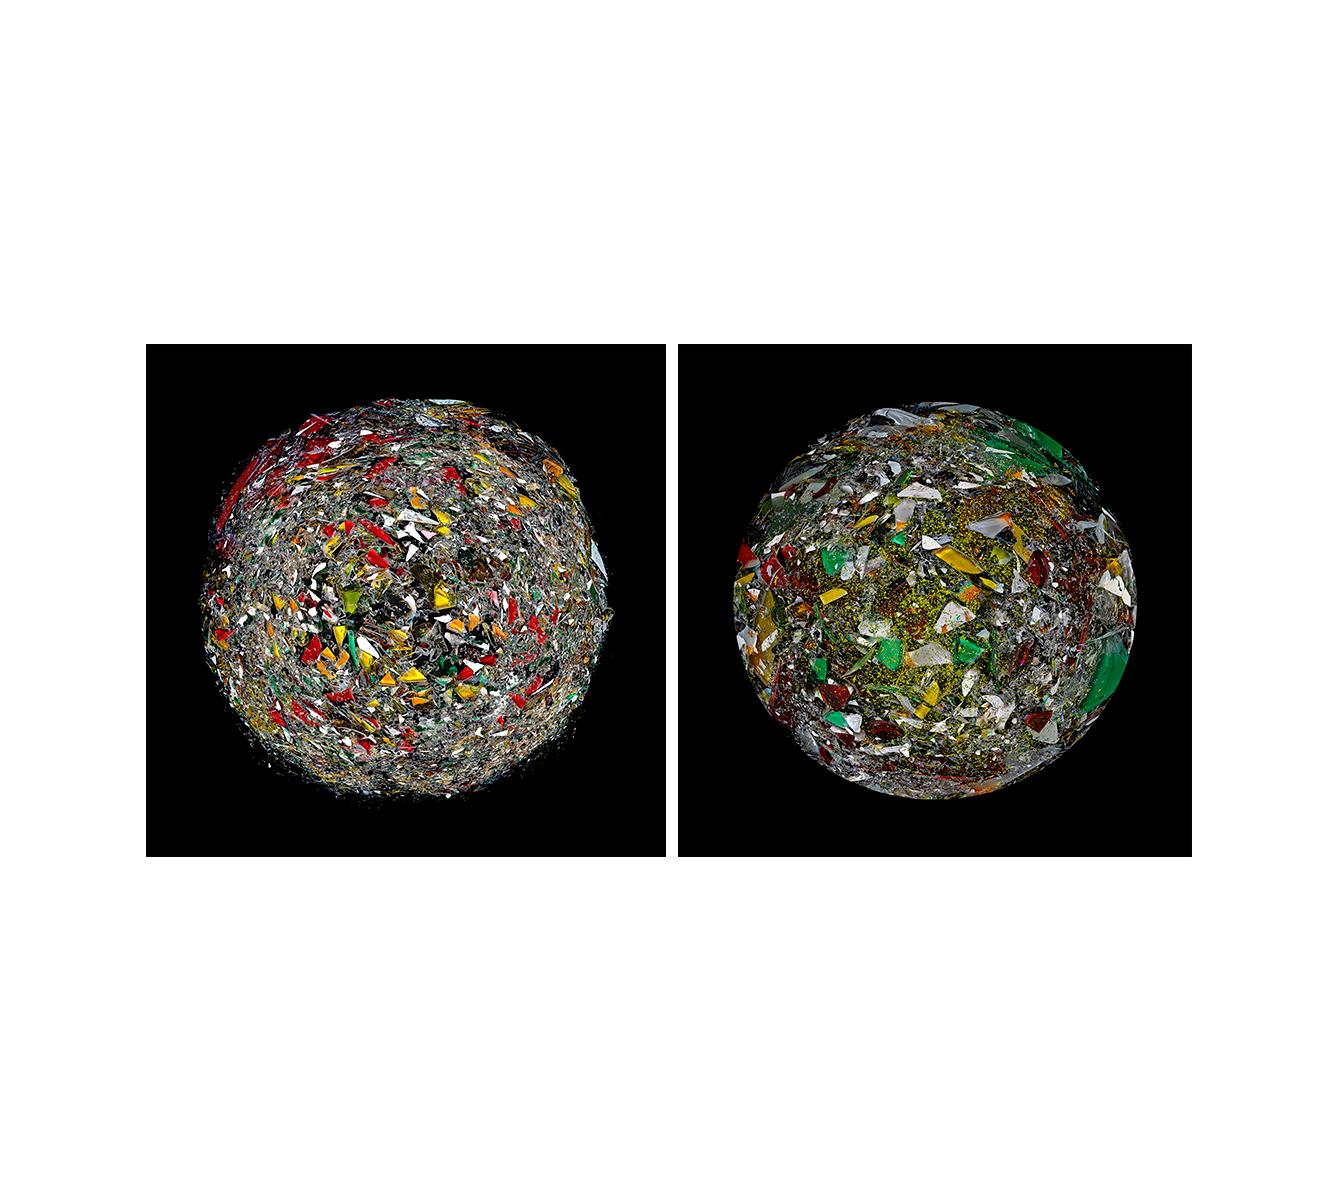 Diptych: The Broken Planet and The Excitement Planet by Zoltan Gerliczki
From the series "The Broken Planet"
Archival Pigment Print 
Individual size: 45 in H x 45 in W.
Overall size: 45 in H x 90 in W. 
Edition of 9 + 2AP
Unframed
2020


Pieces can